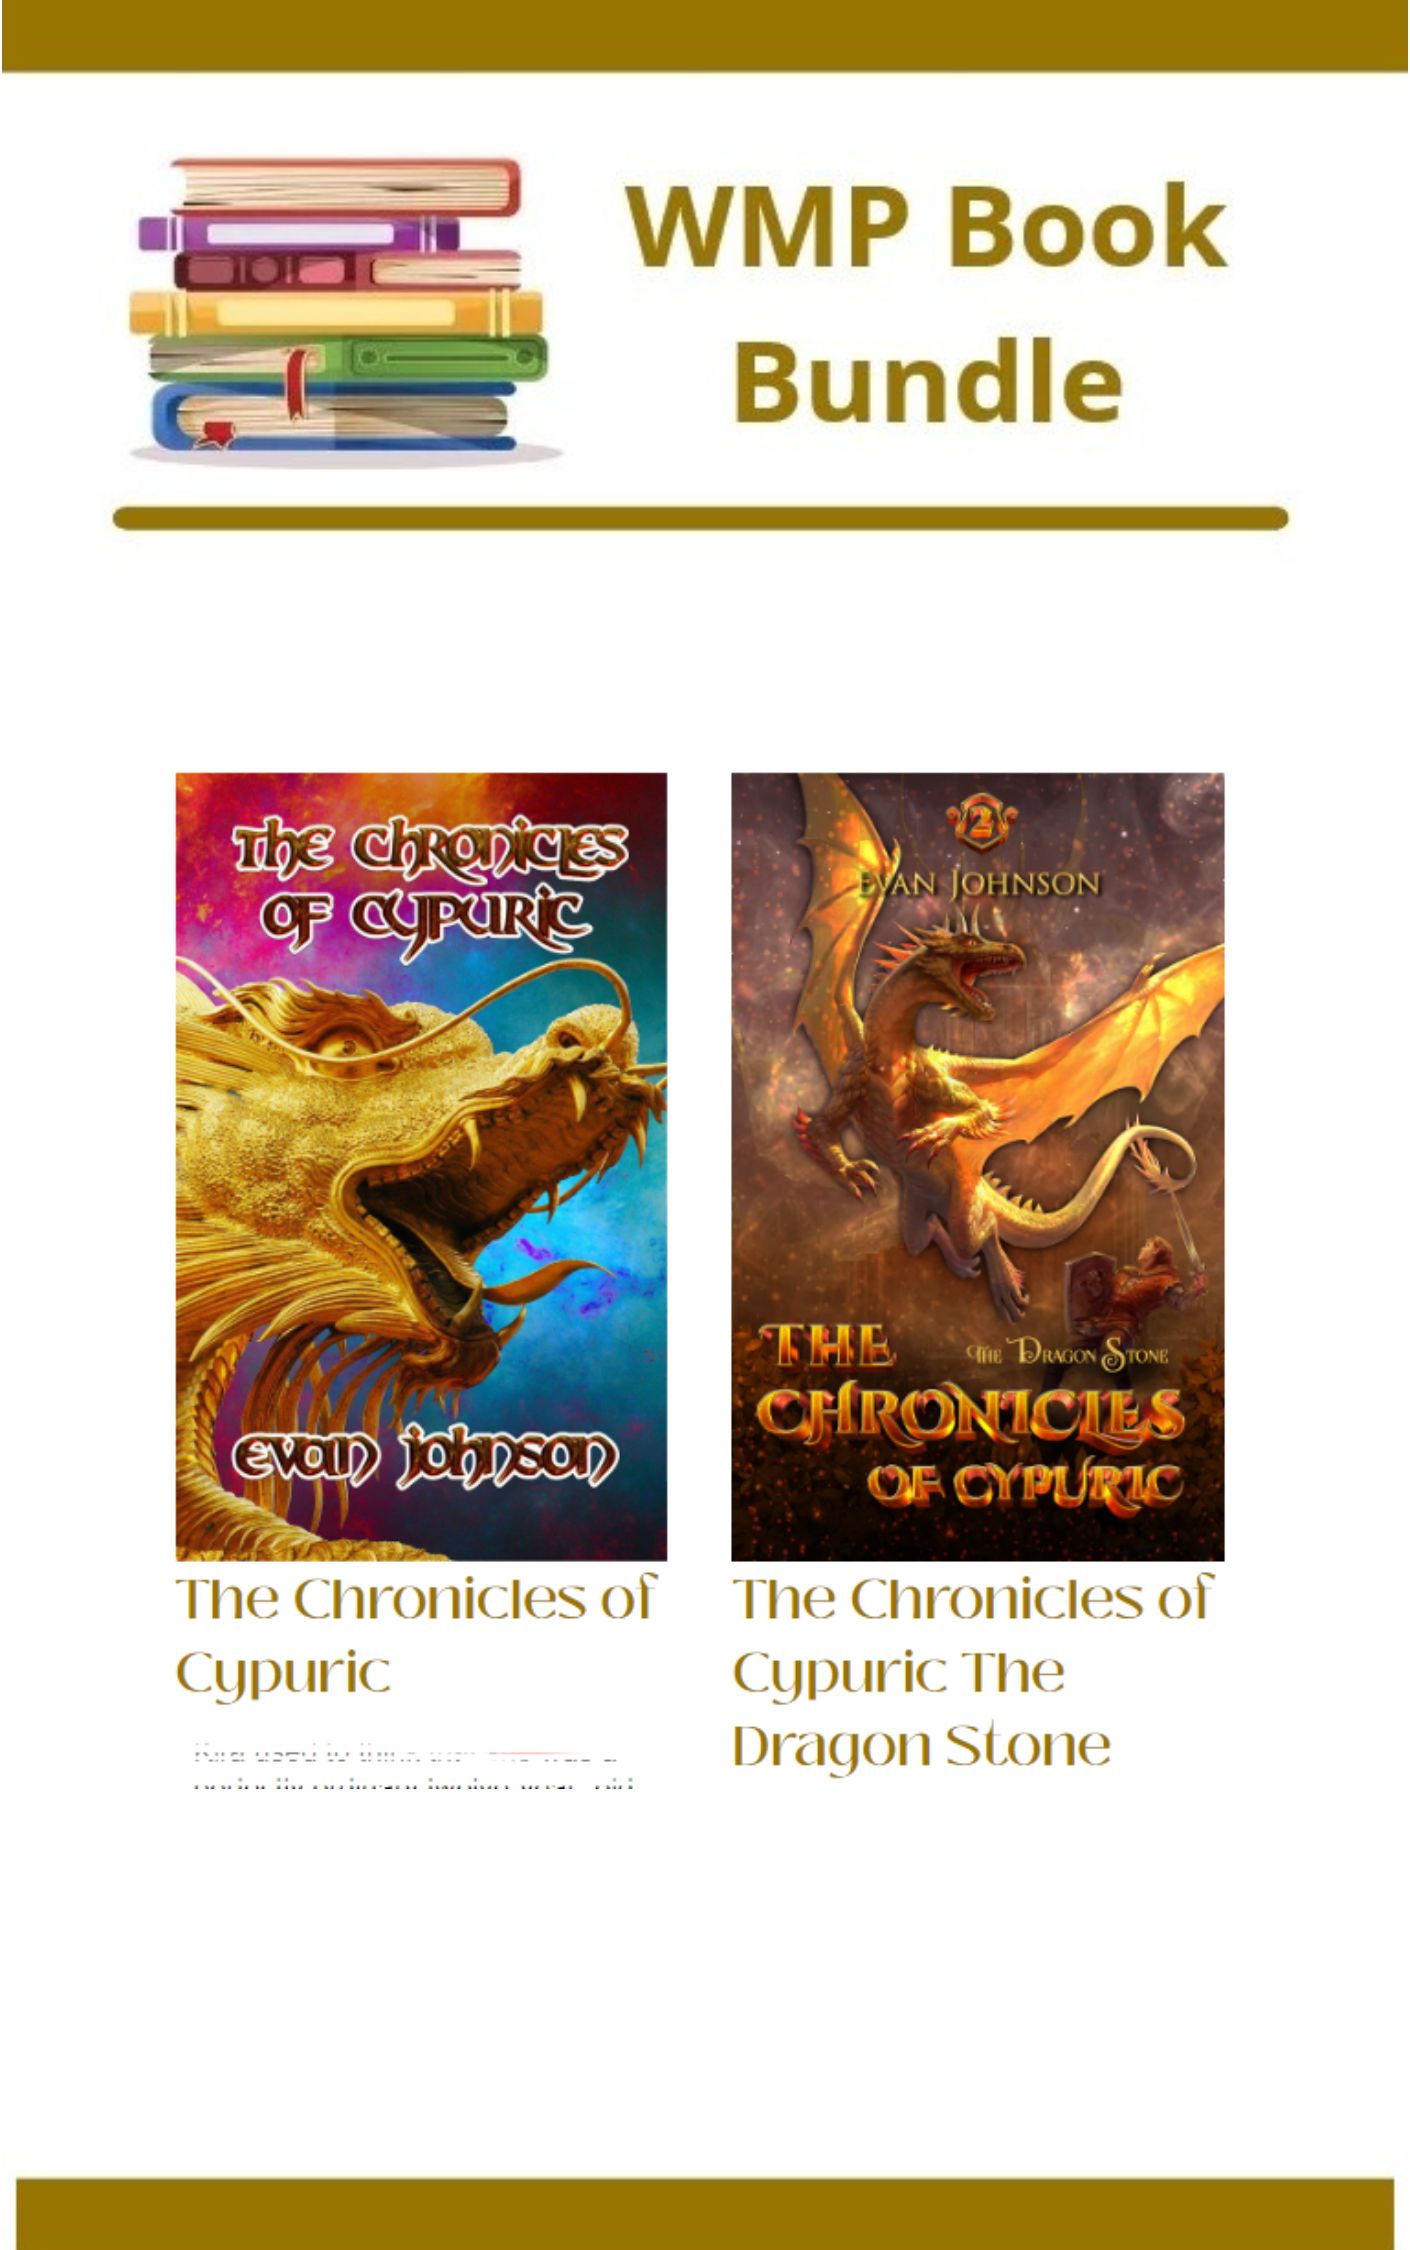 The Chronicles of Cypuric Series bundle